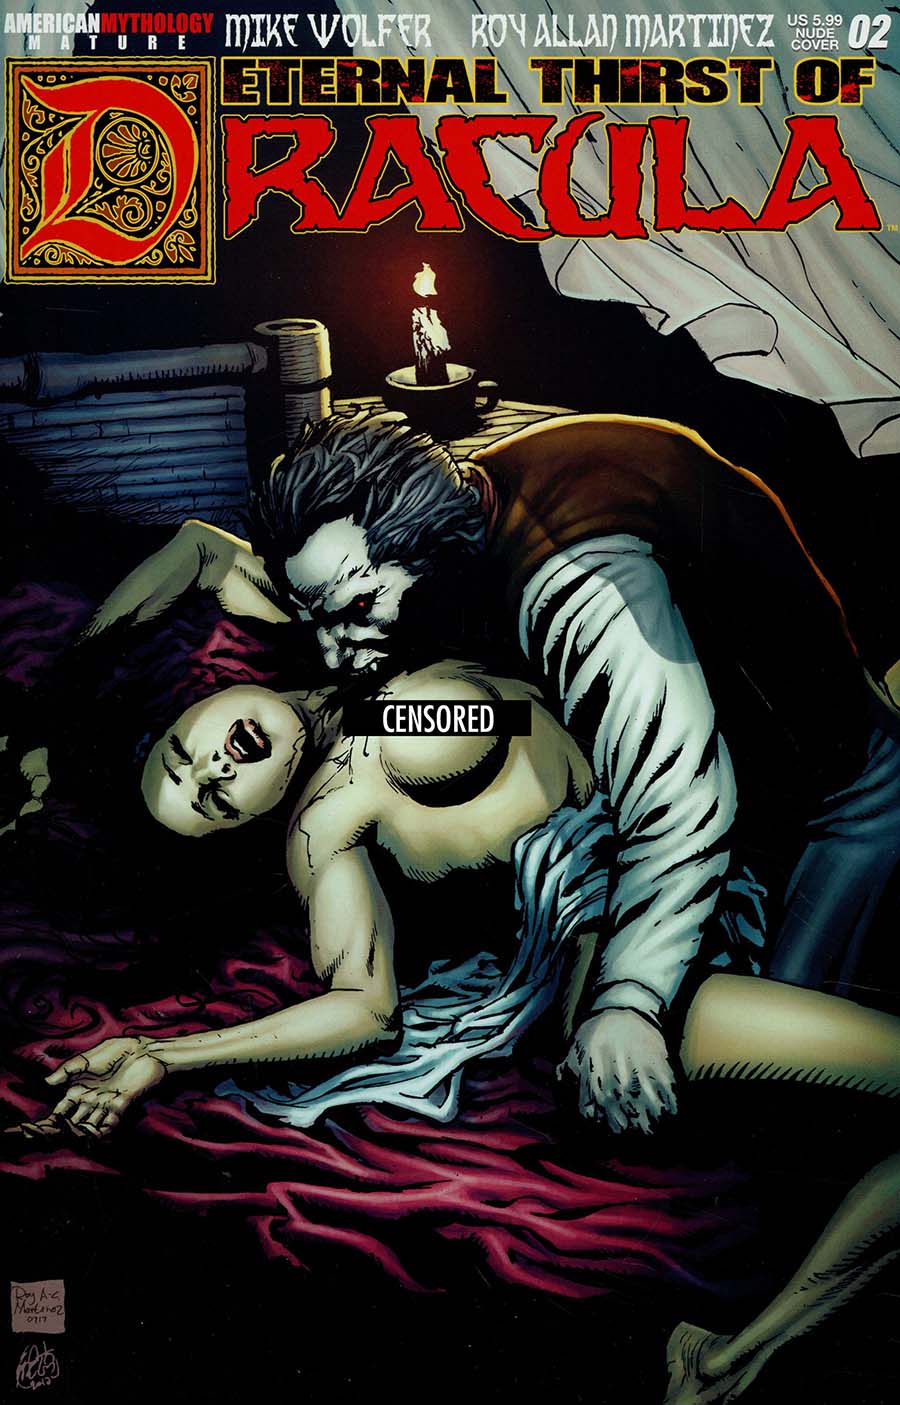 Eternal Thirst Of Dracula #2 Cover B Variant Roy Allan Martinez Ravage Nude Cover